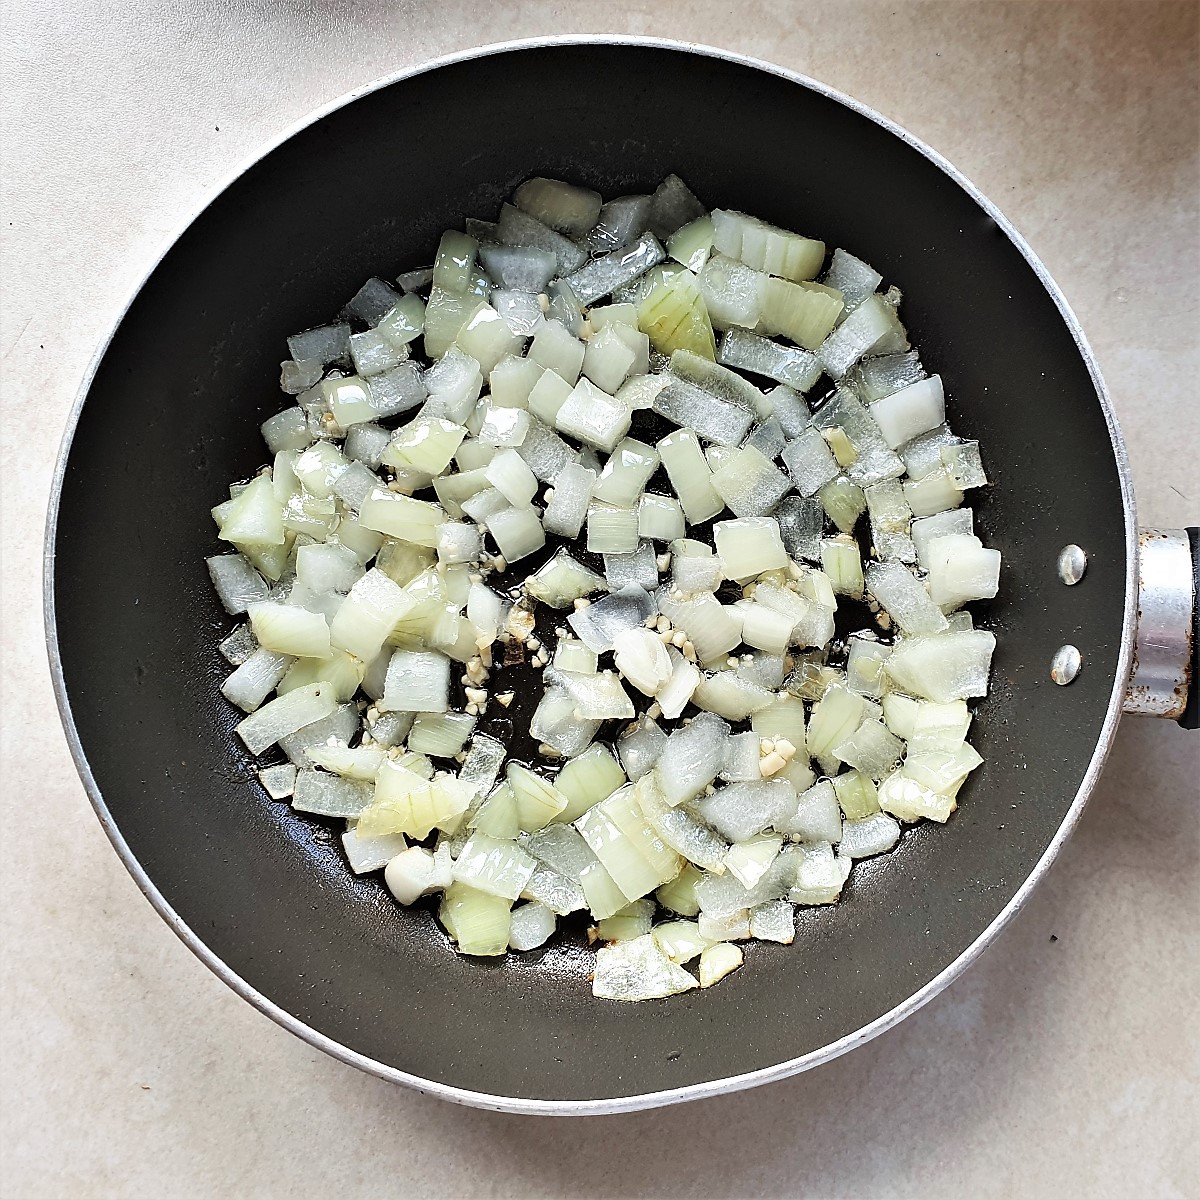 Chopped onions and garlic frying in a pan